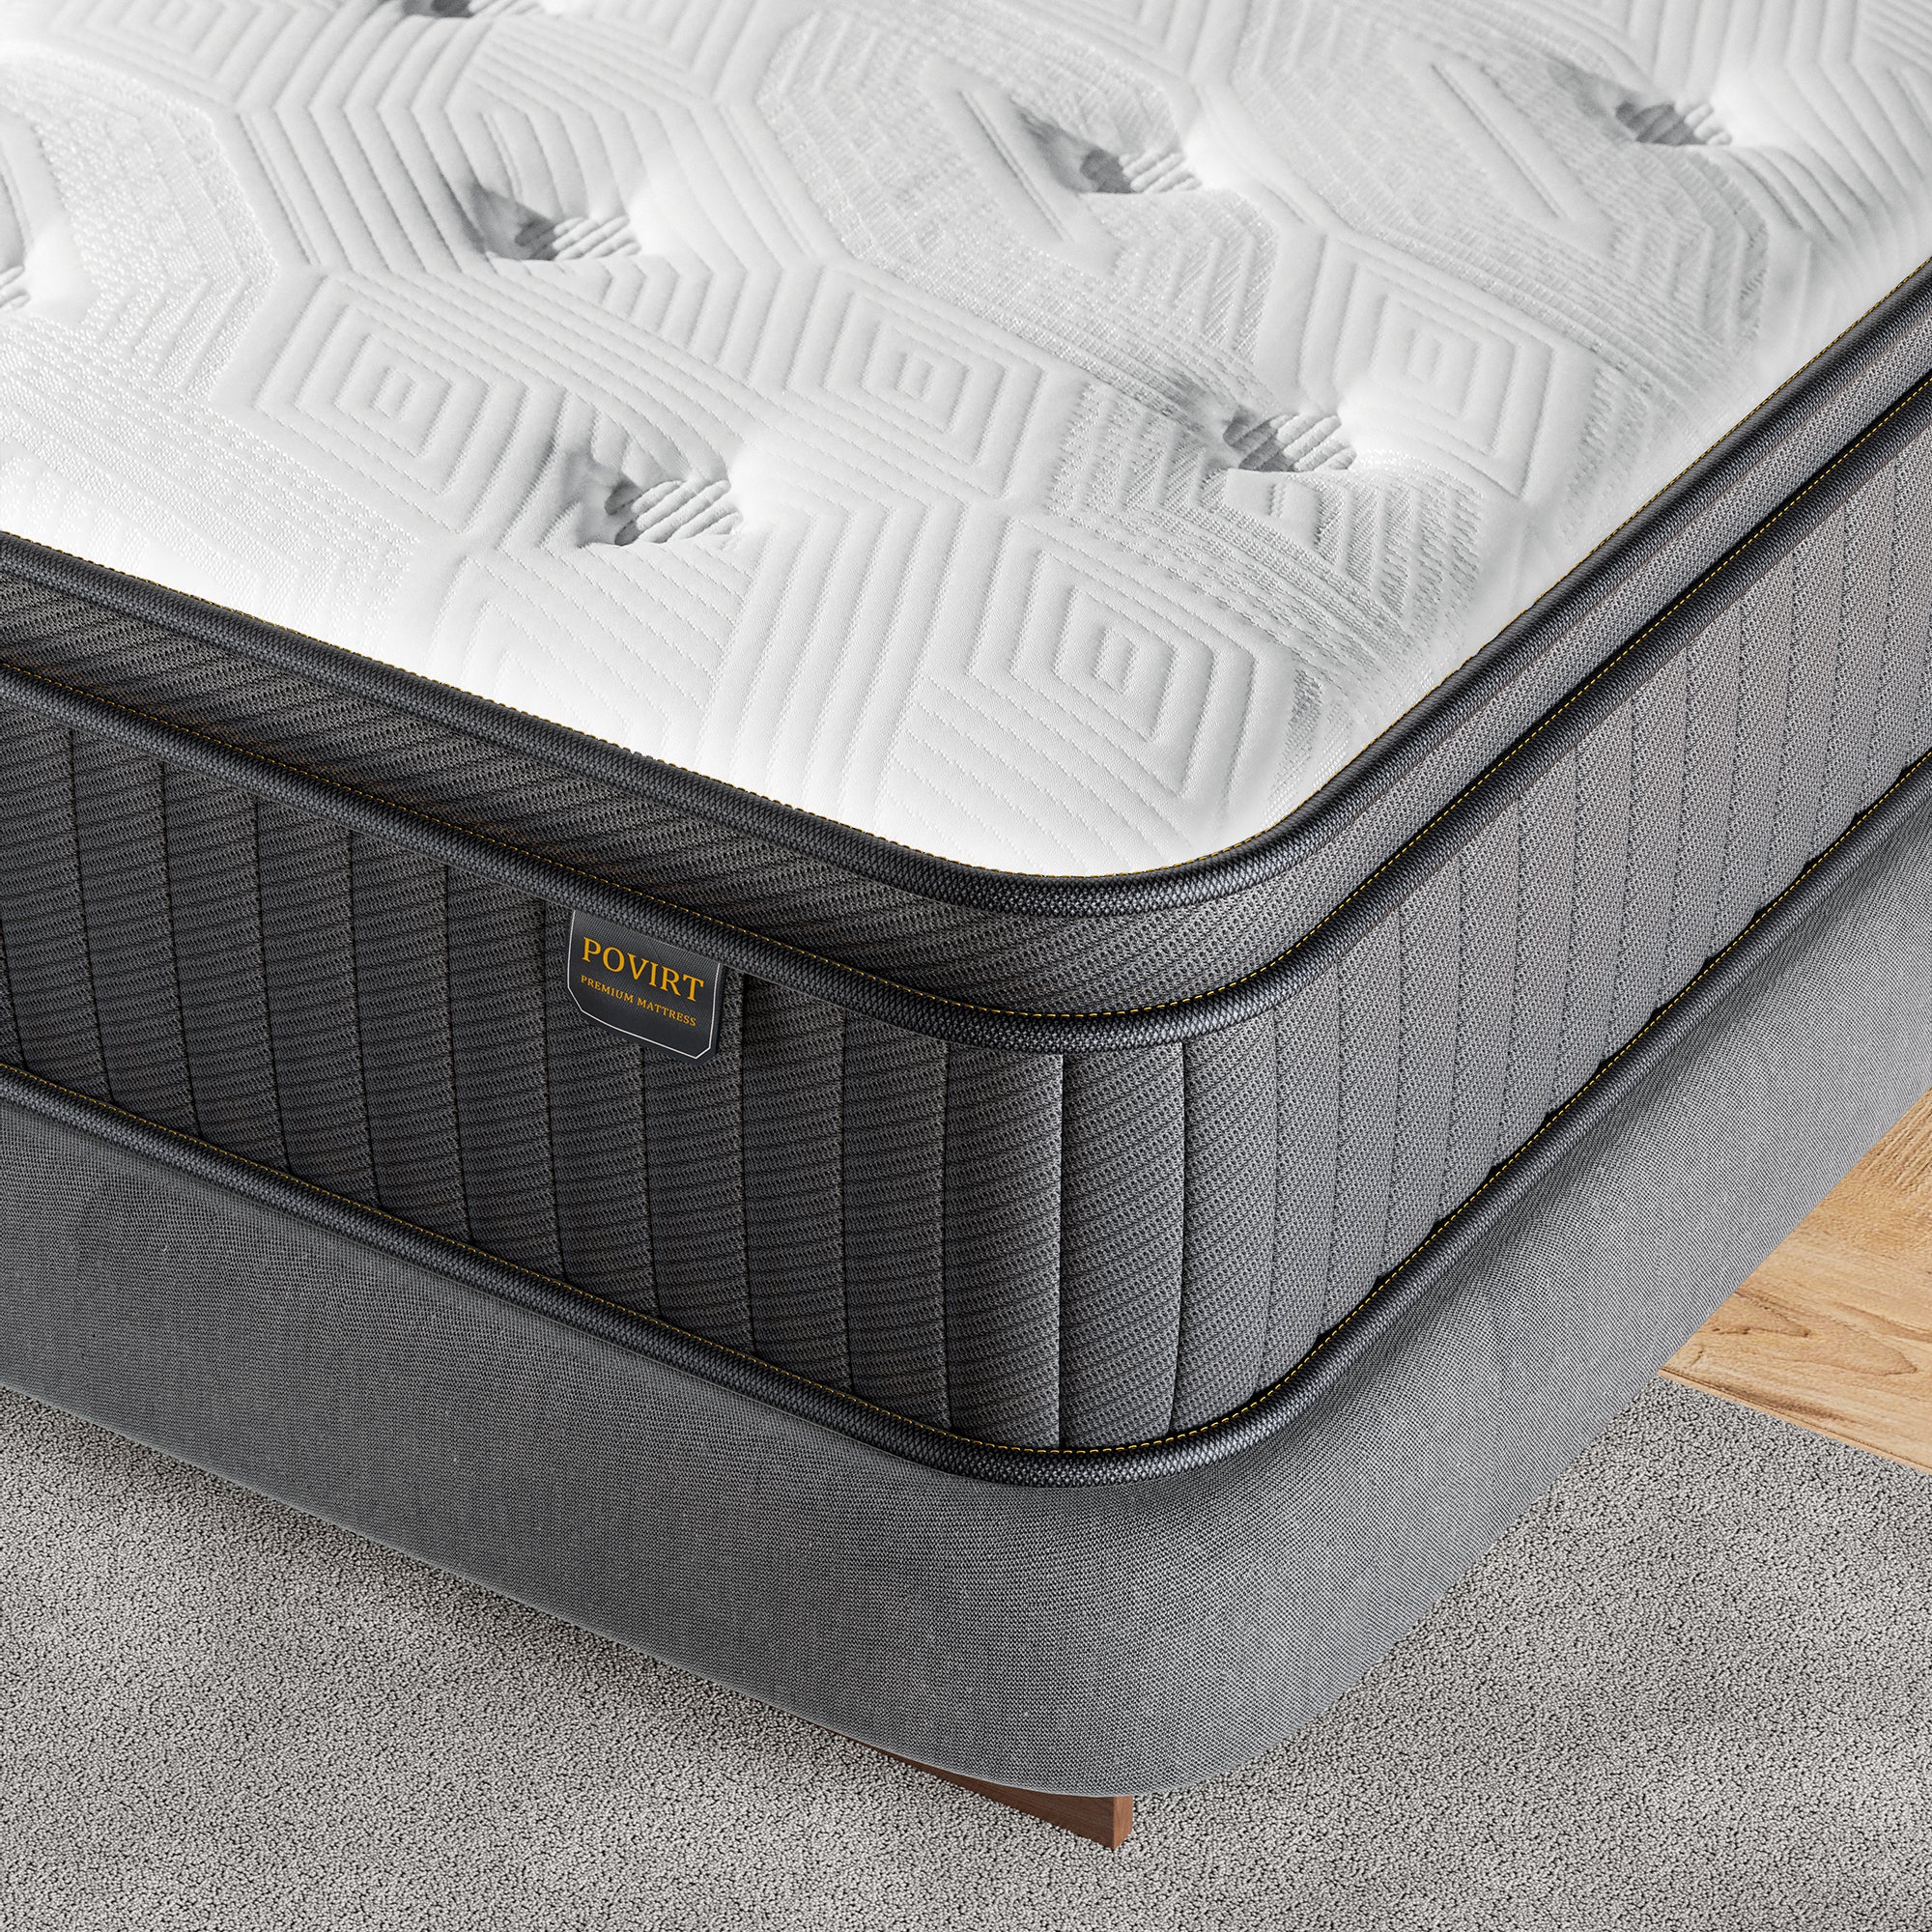 Povirt Twin Mattress, 10 Inch Cool Memory Foam Innerspring Hybrid Mattress  for Pressure Relief, 7-Zone Extra Edge Support Medium Firm Twin Bed 